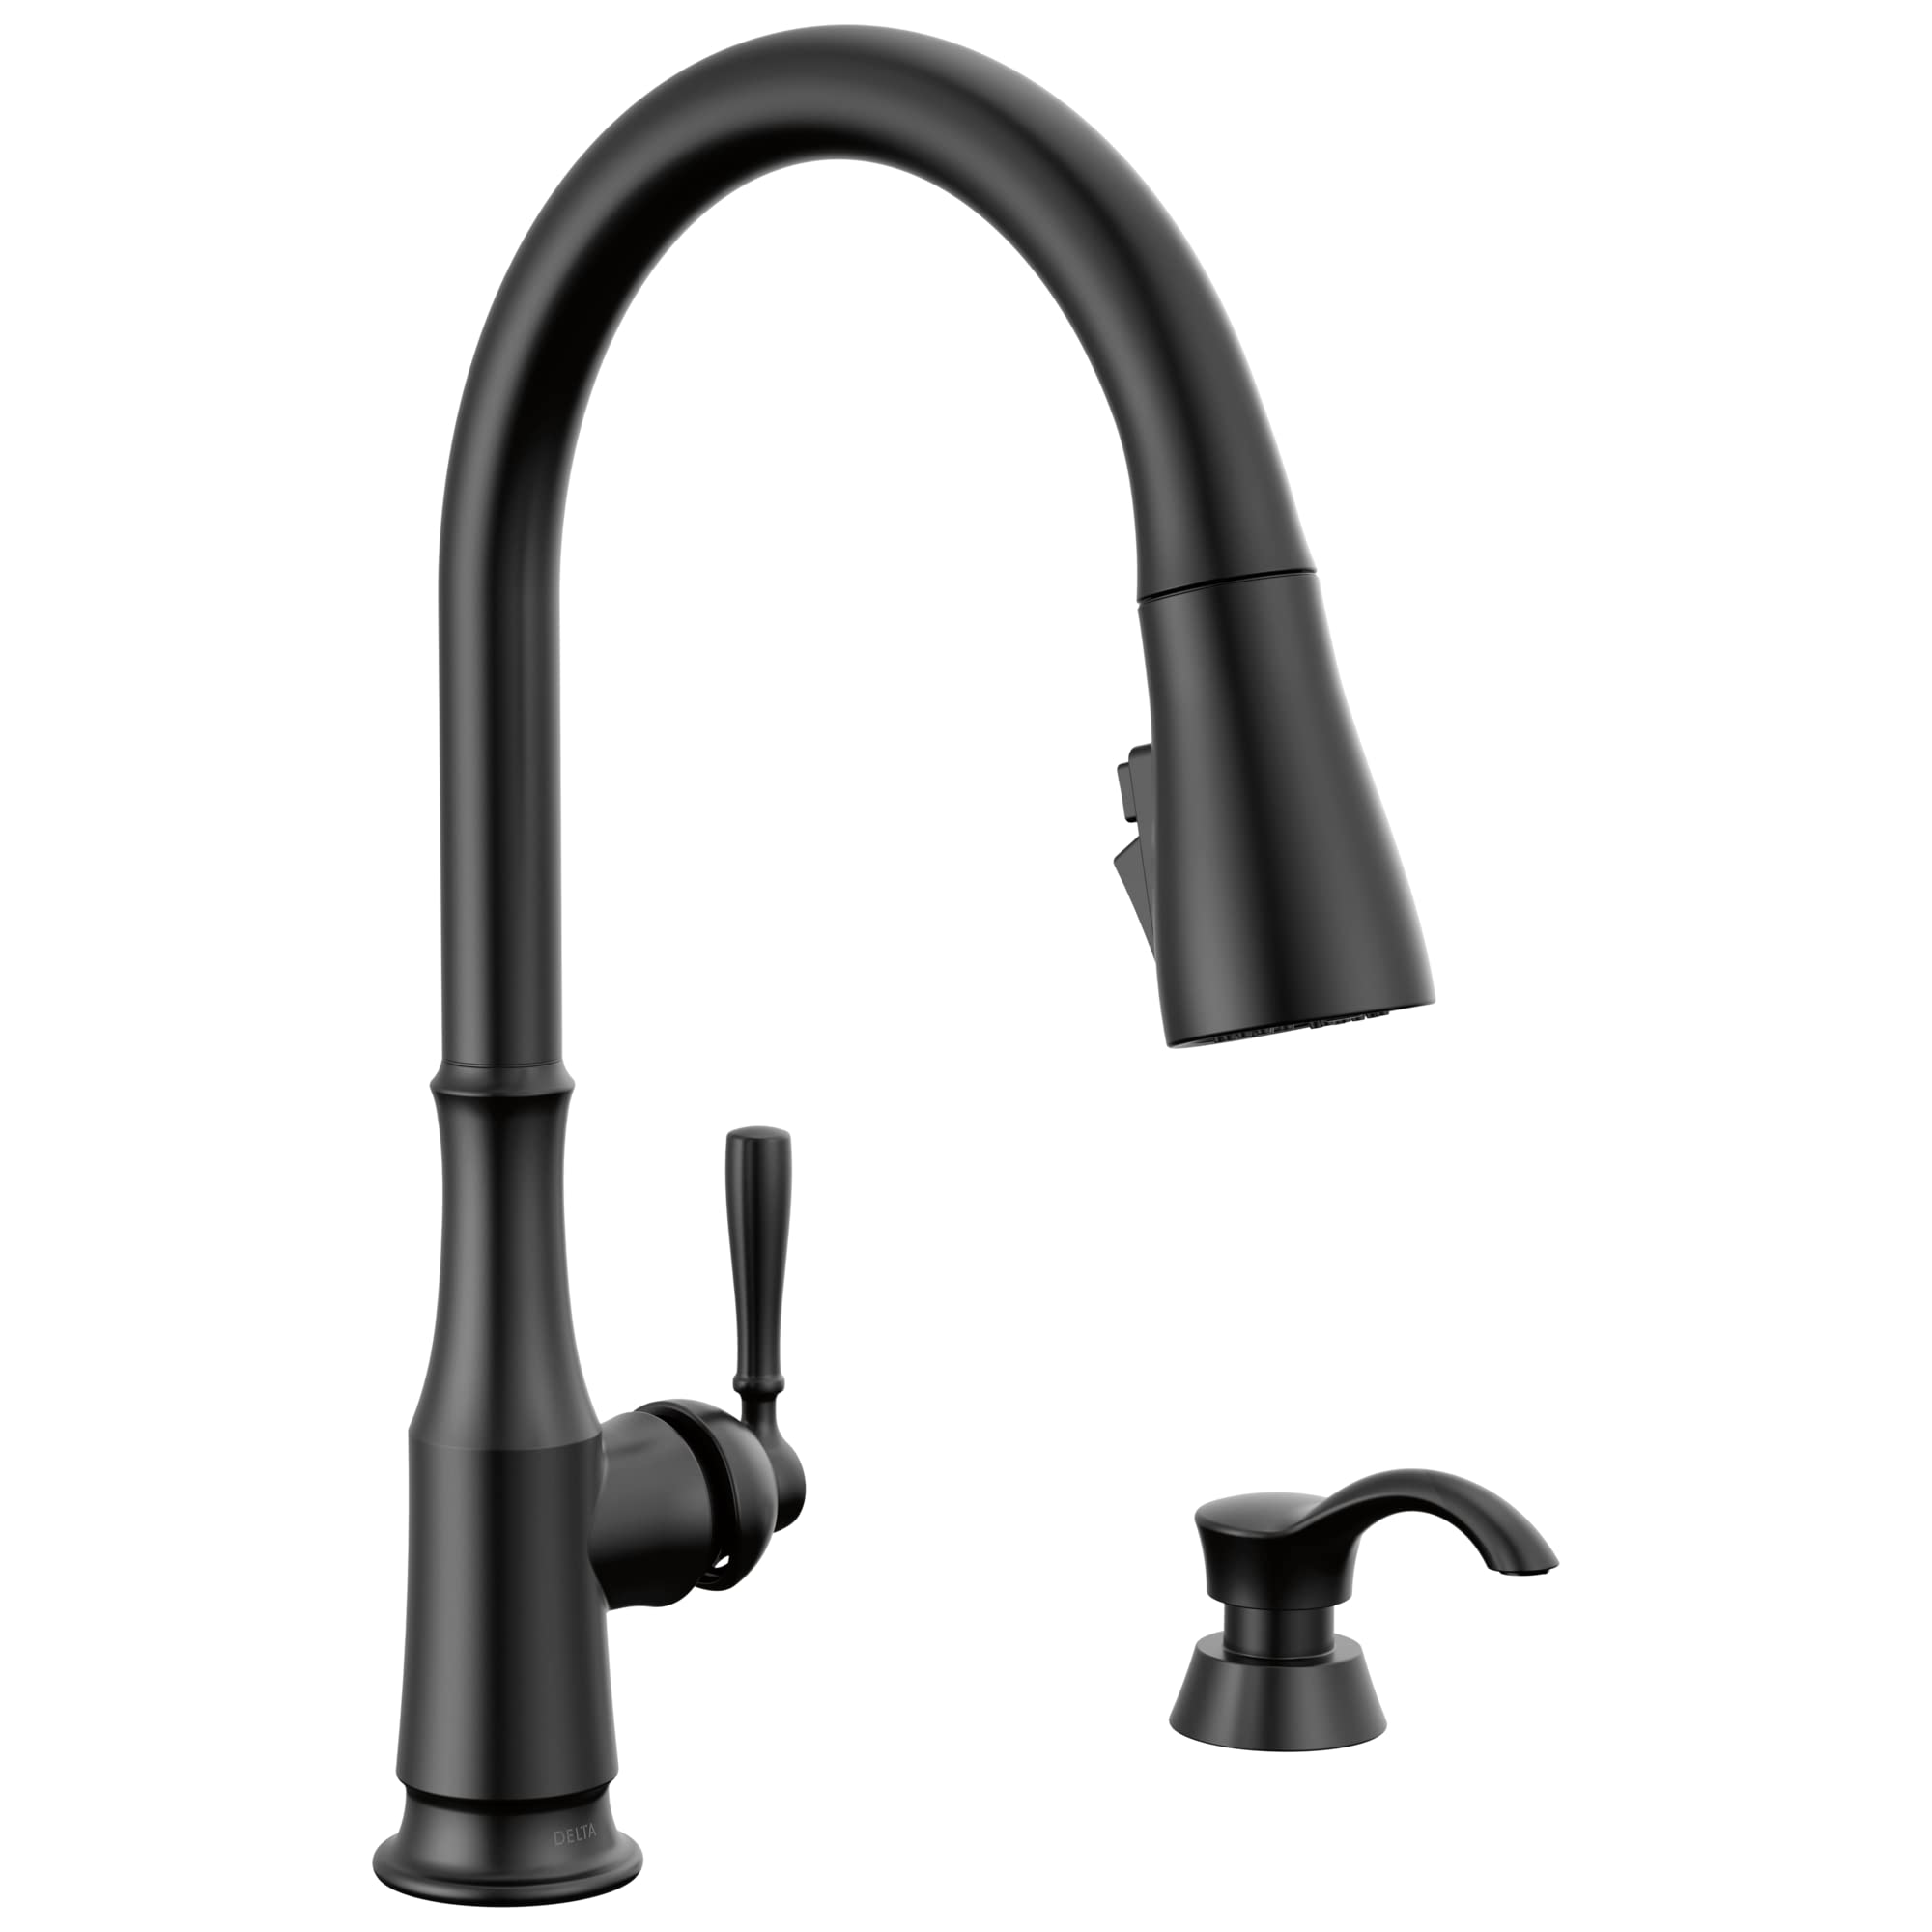 Delta Faucet Capertee Black Kitchen Faucet with Soap Dispenser, Kitchen Faucets with Pull Down Sprayer, Kitchen Sink Faucet with Magnetic Docking Spray Head, Matte Black 19877Z-BLSD-DST